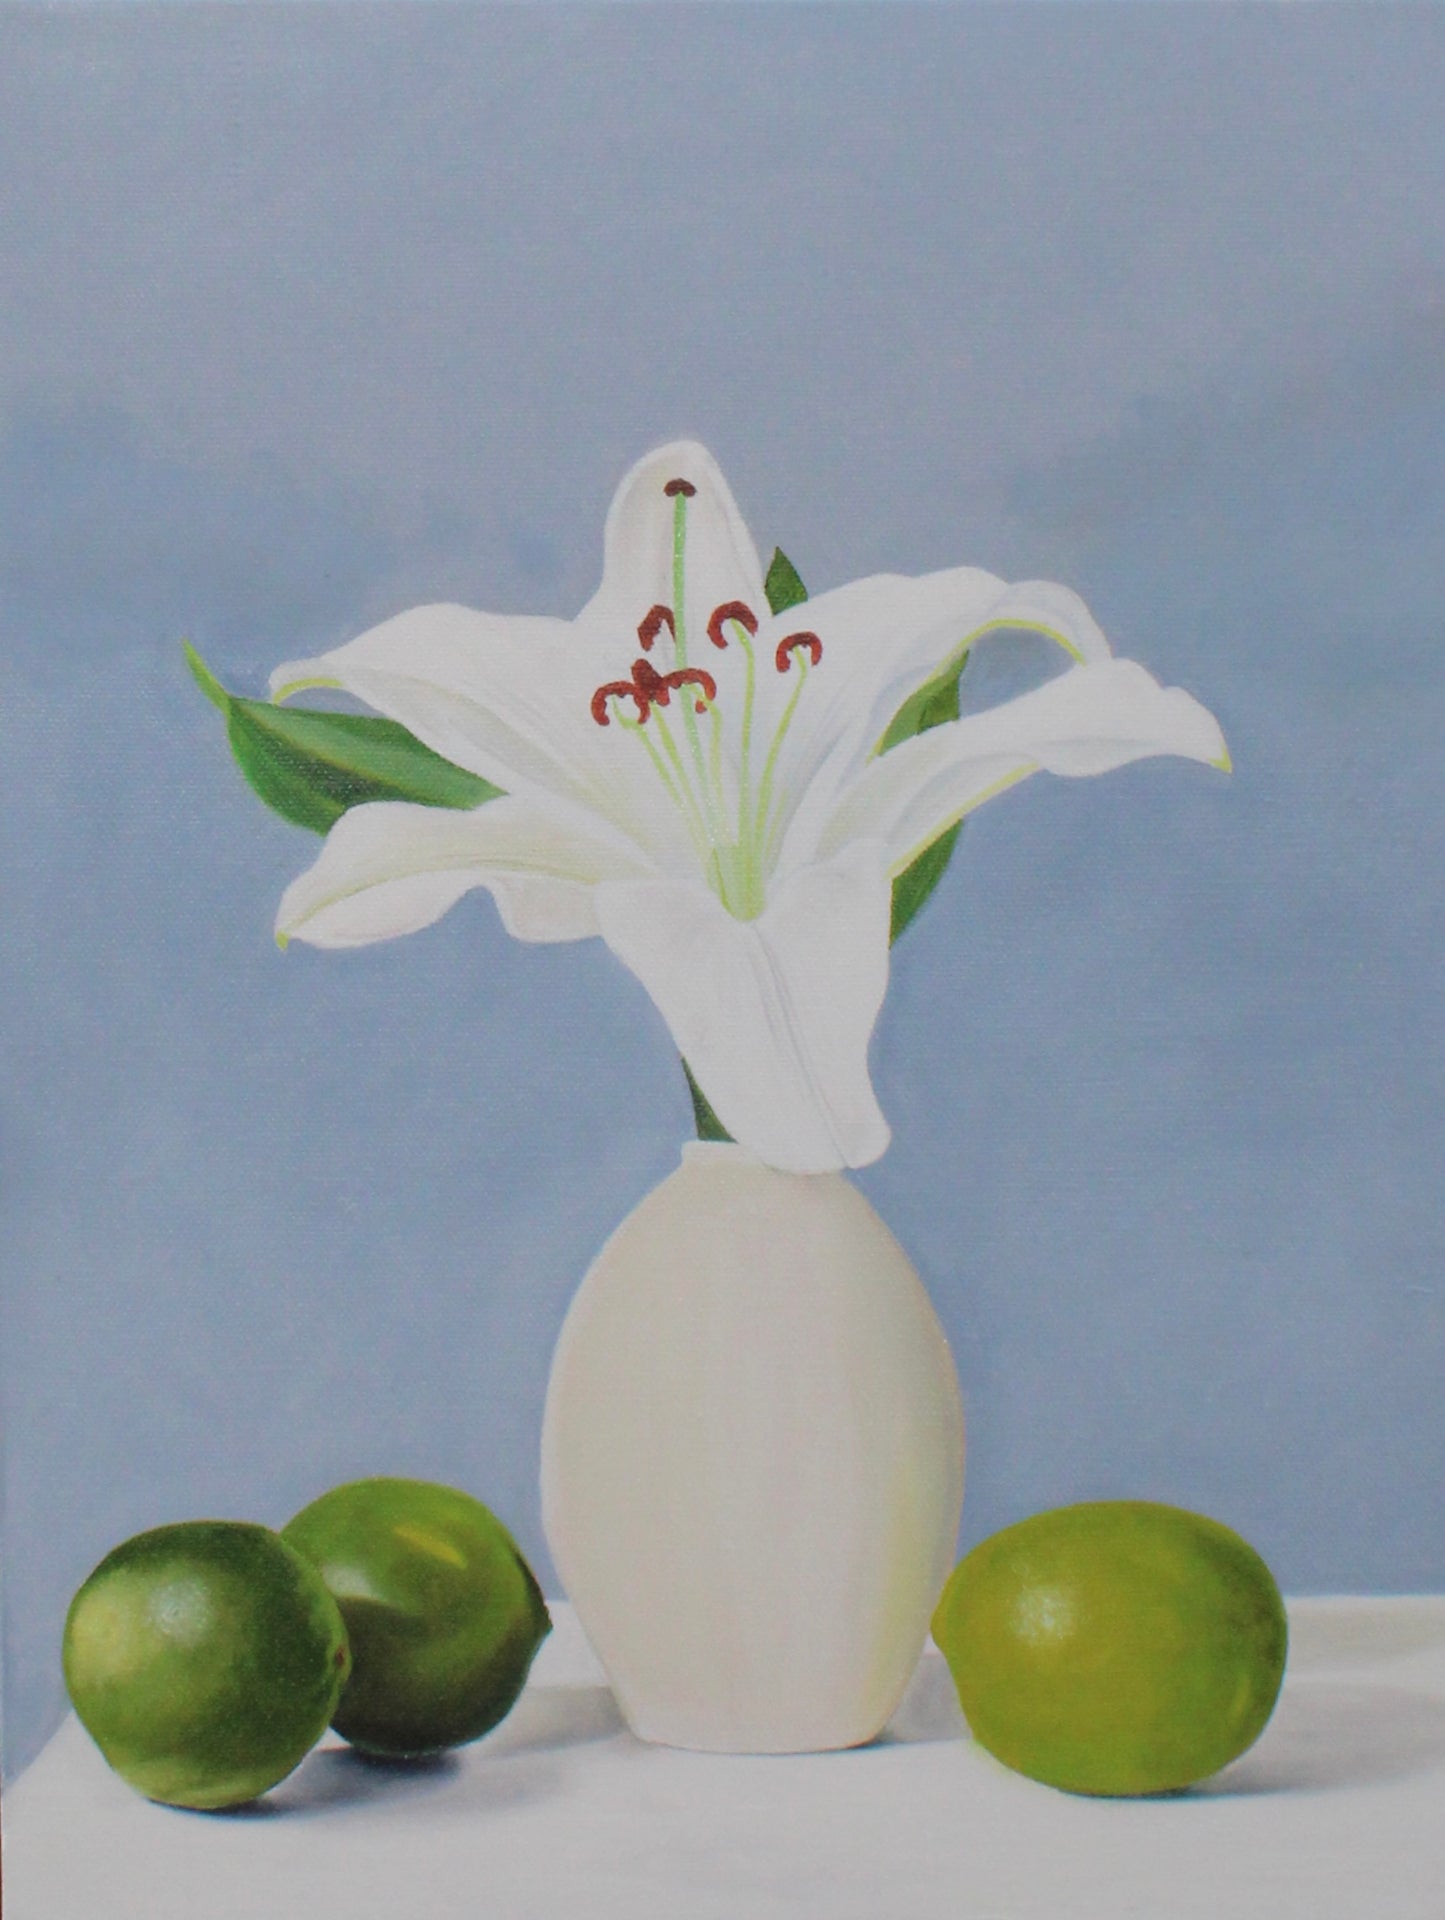 Lily with a dash of green lemon - Original Oil Painting by Shobika